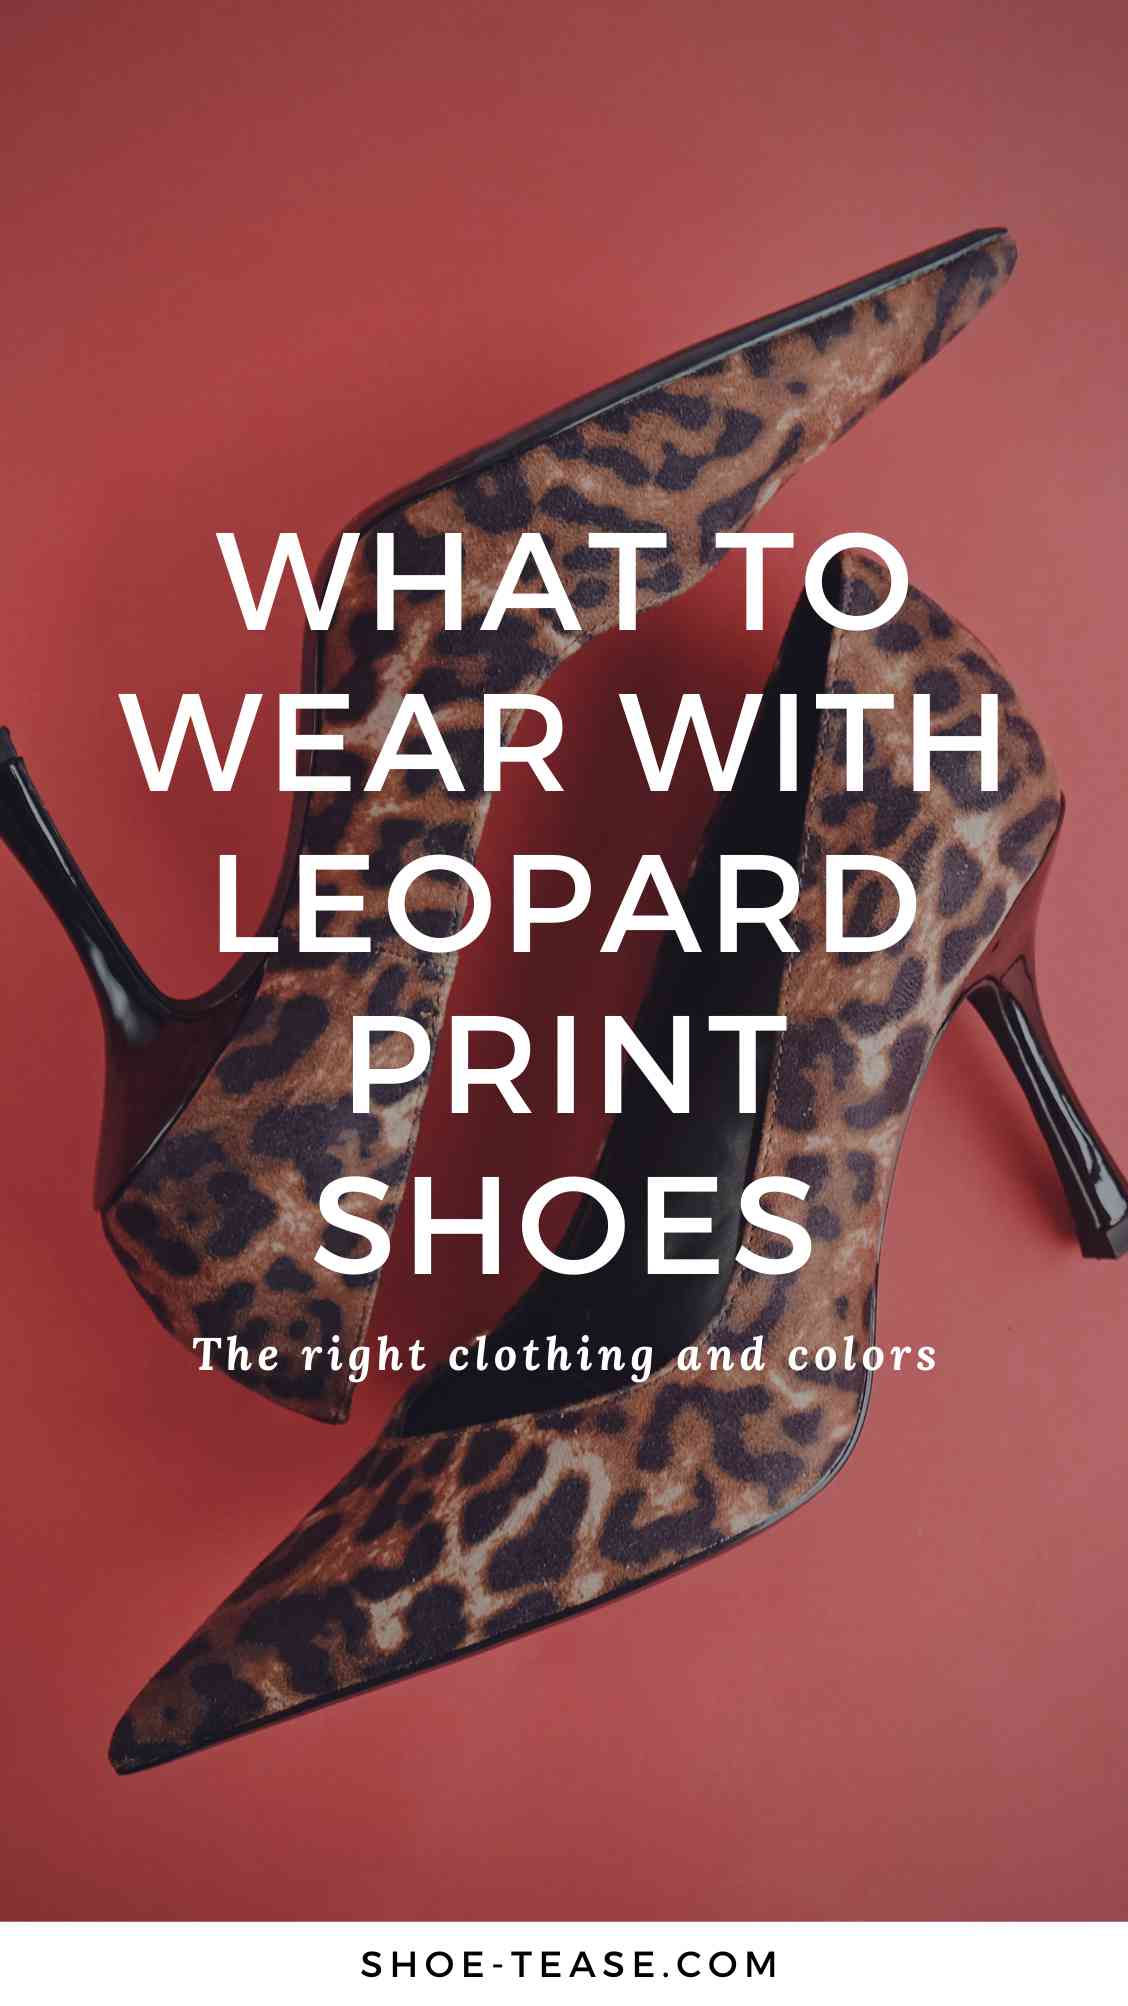 What to Wear with Leopard Print Shoes + Cheetah - 20 Great Outfit